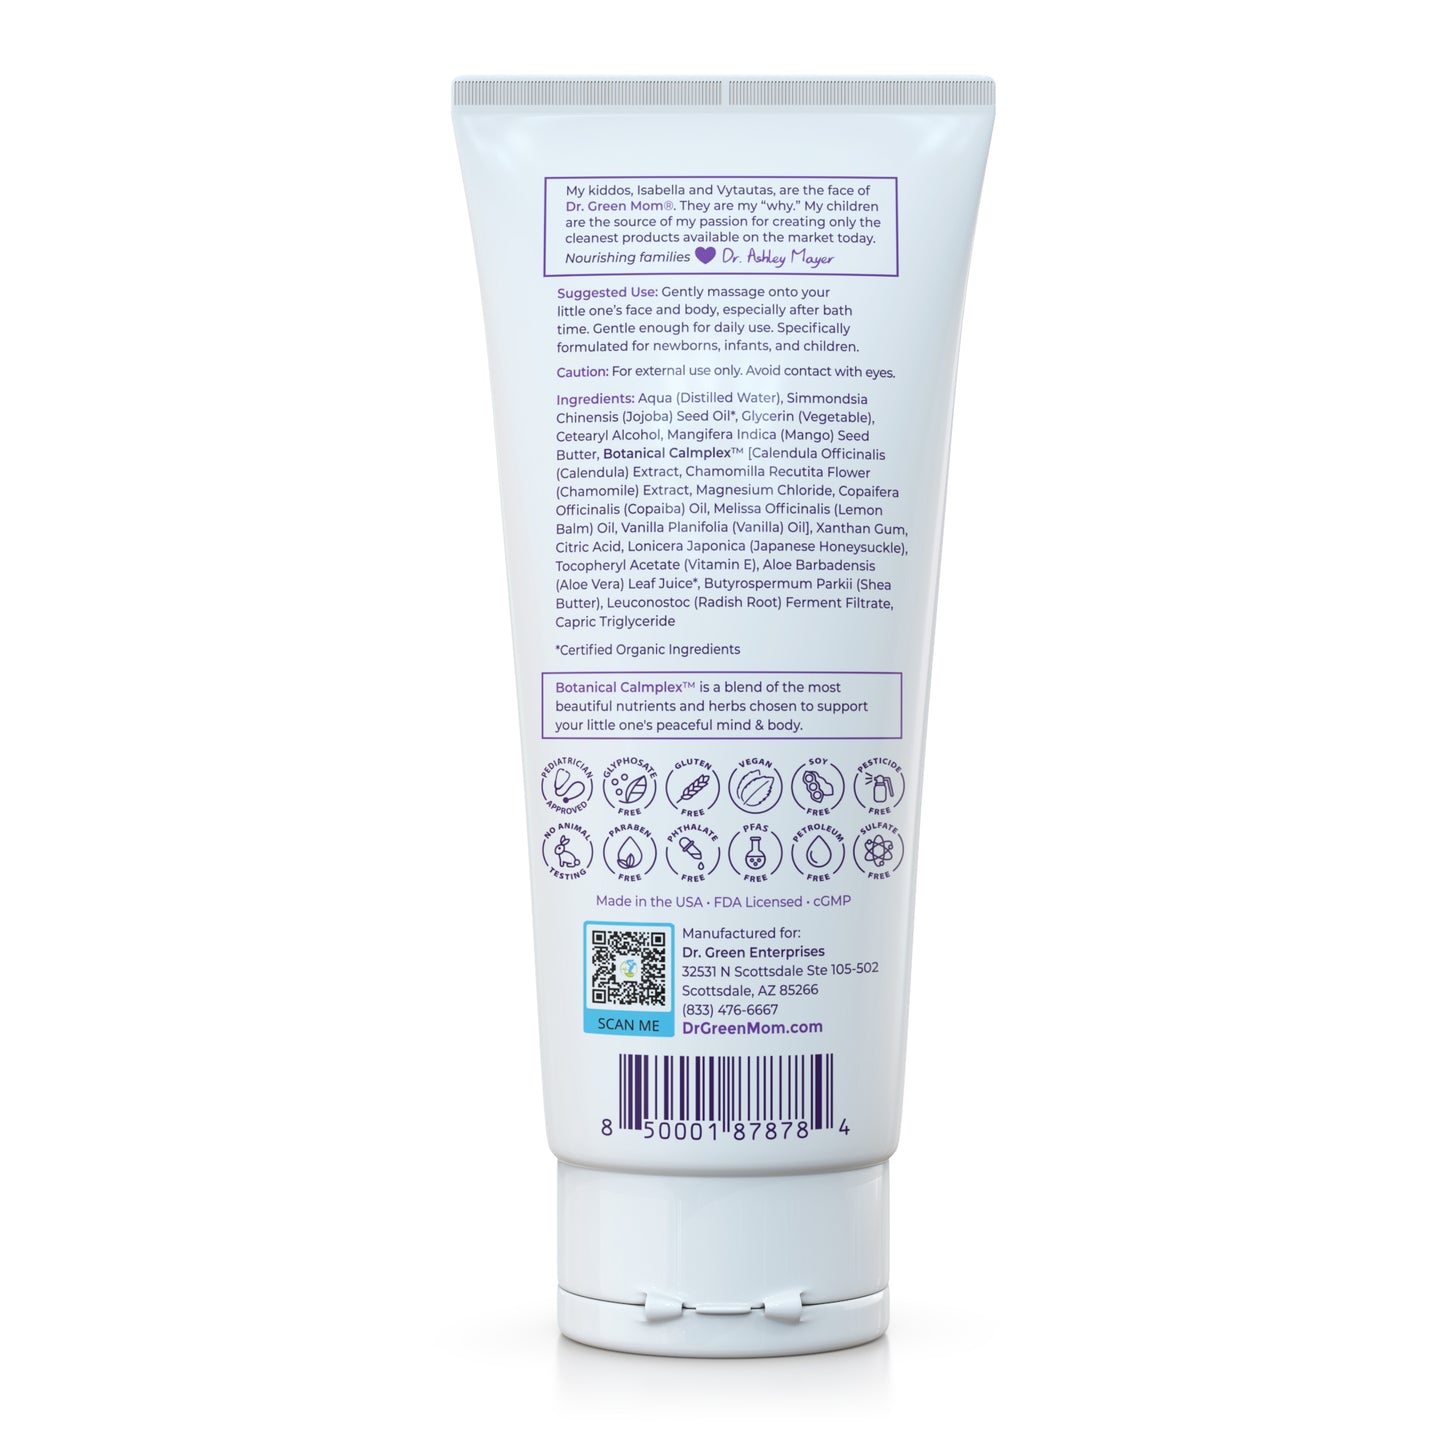 Cleanest Care™ Nourishing Daily Lotion (With Botanical Calmplex™) - 8 oz.